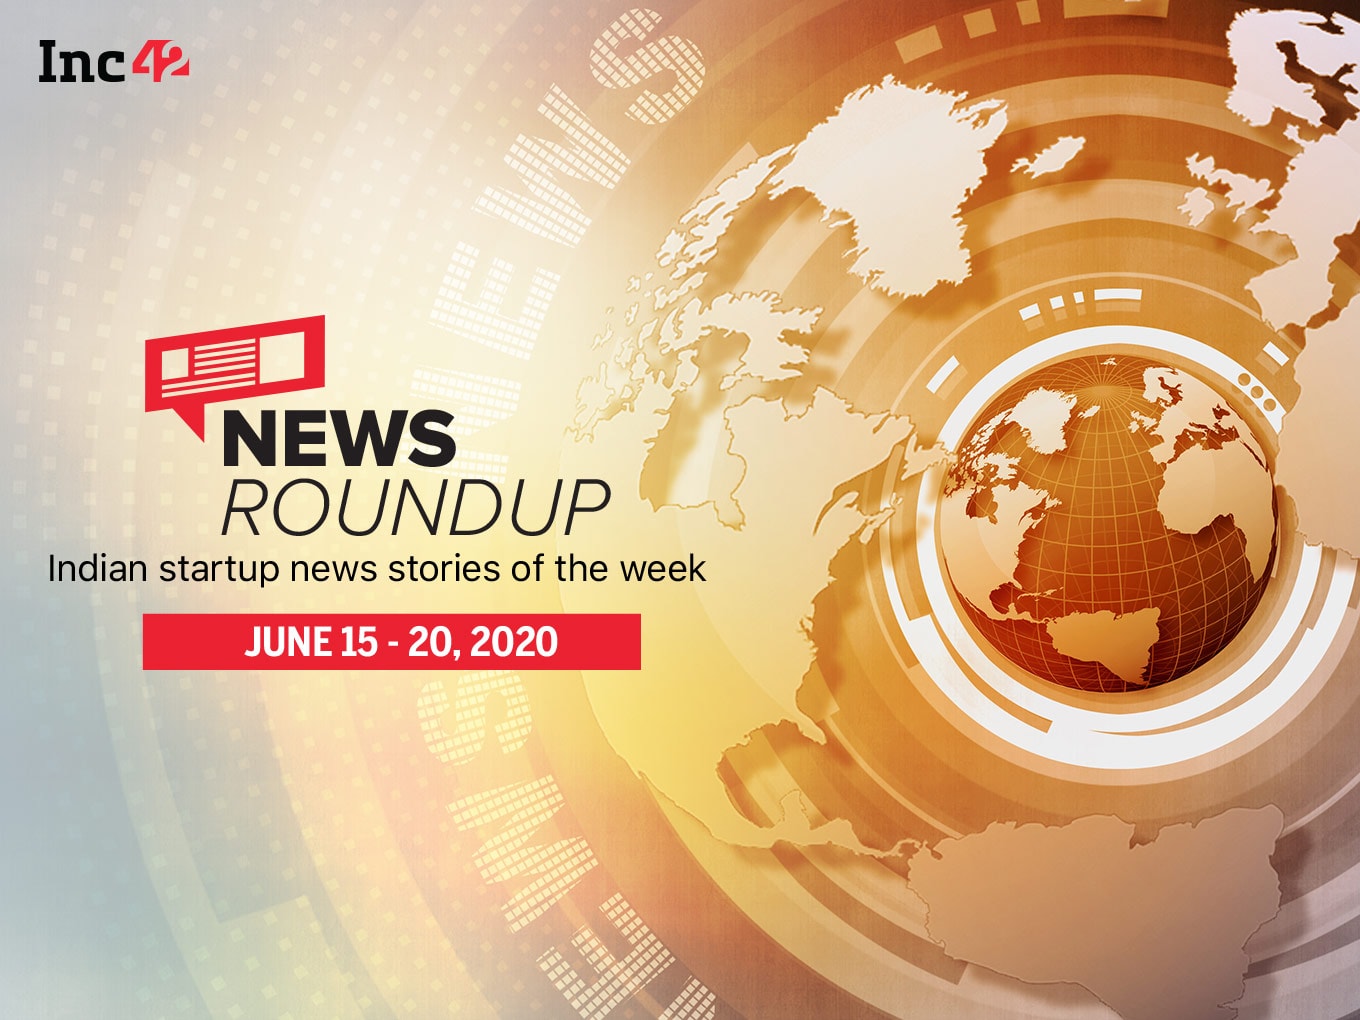 News Roundup: 11 Indian Startup News Stories You Don’t Want To Miss This Week [June 15 - 20]